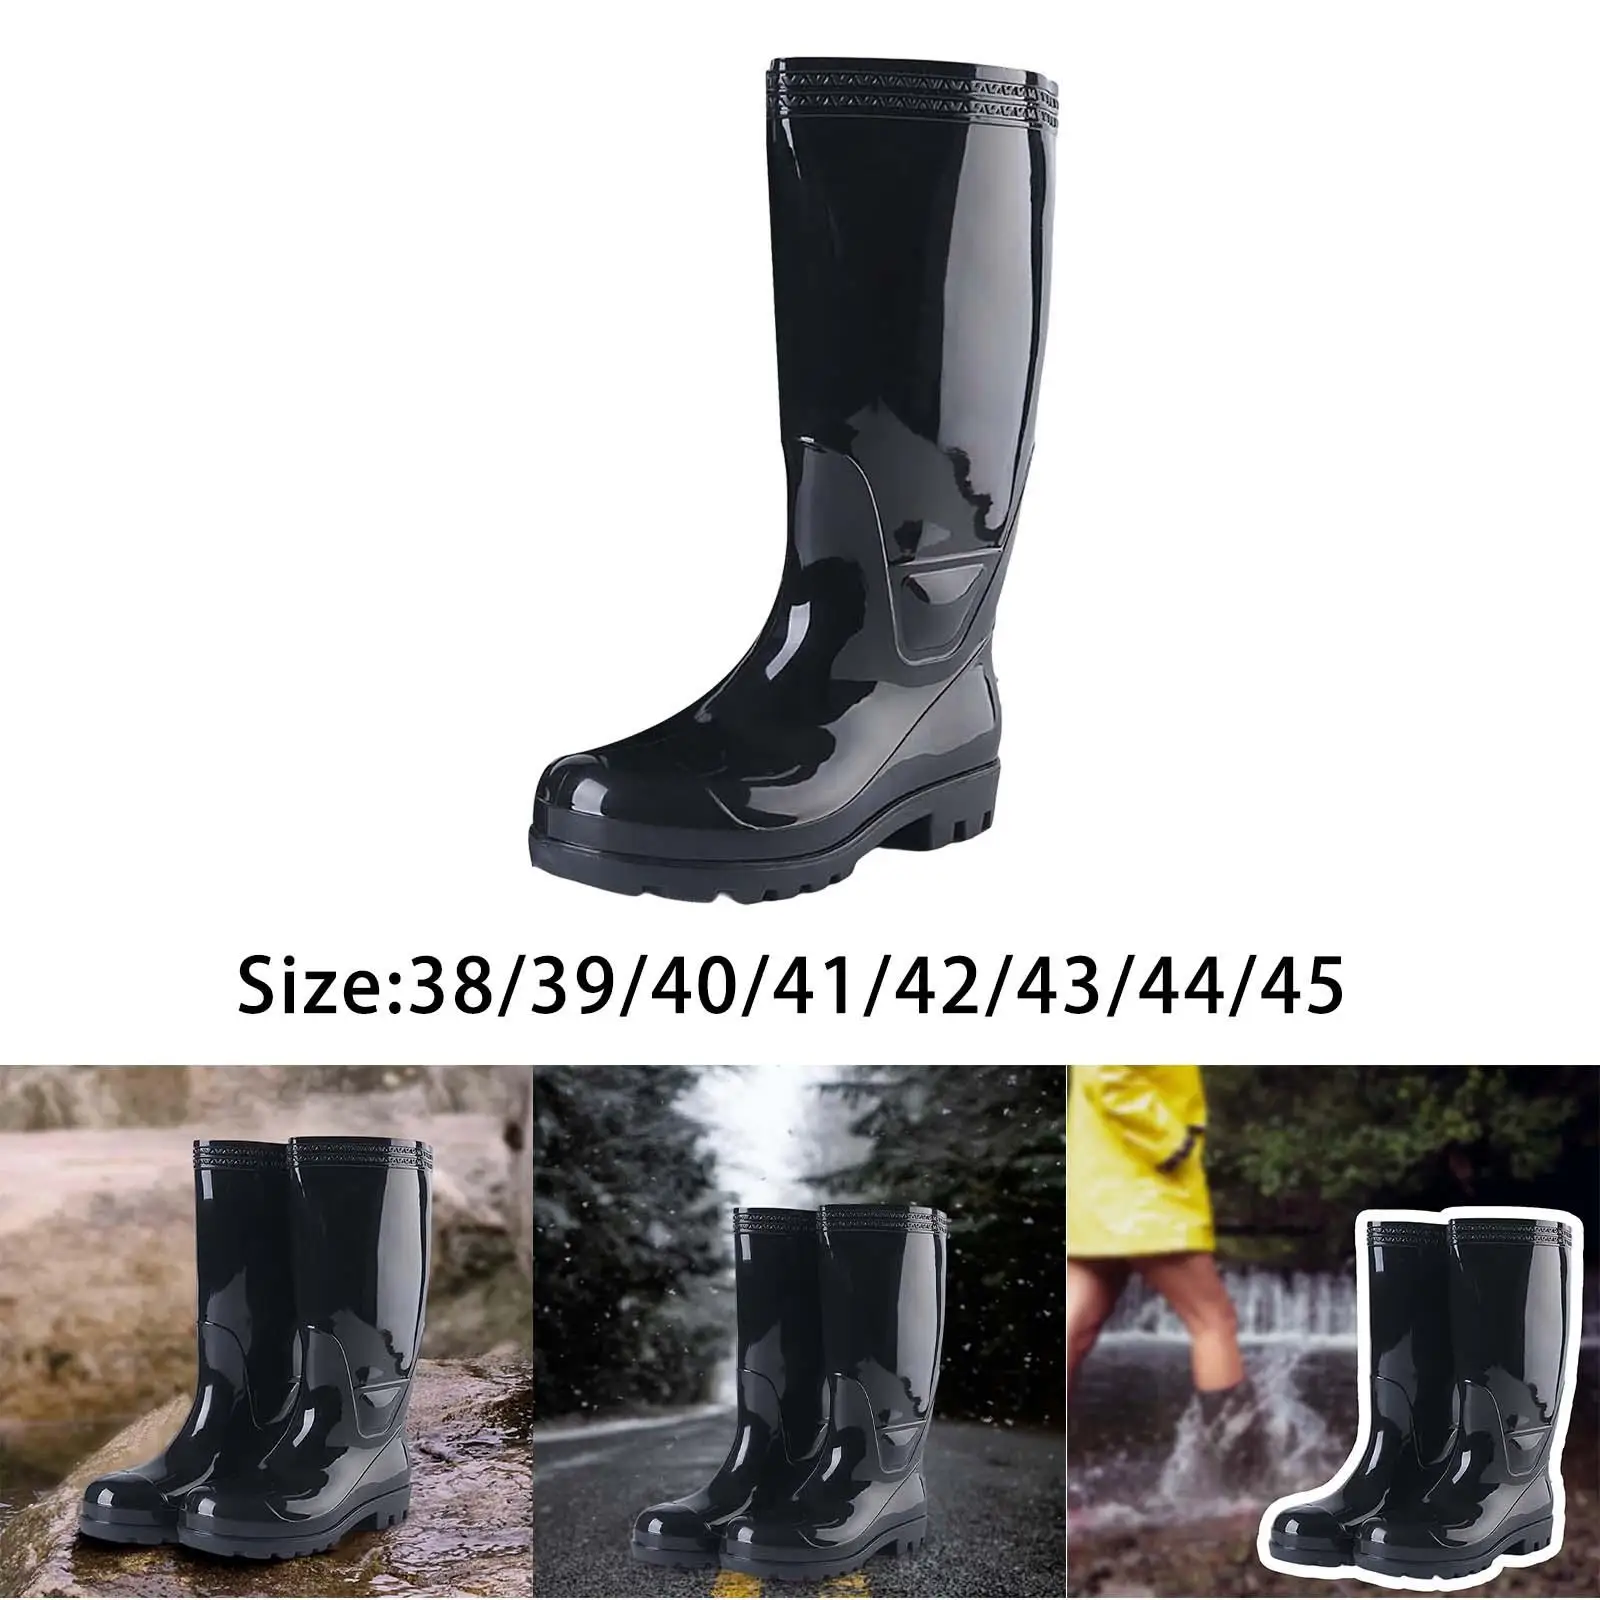 Rain Boots Steel Toe Rubber Boots for Men Anti Slip Knee High Boot Protective Footwear for Gardening Farming Industrial Working